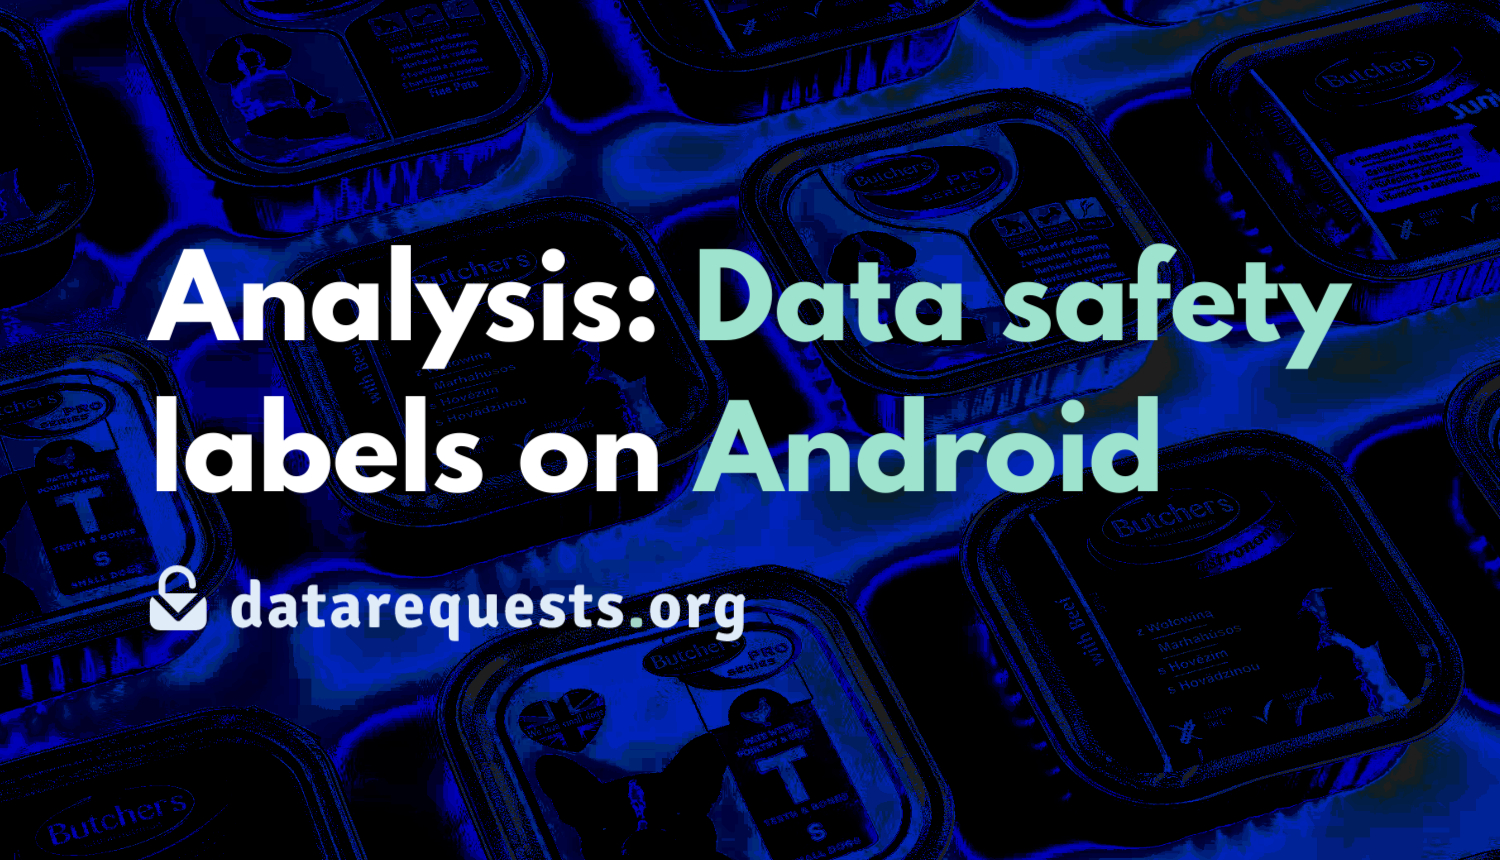 Stylized photo with a blue tint of food containers, above that the text: “Analysis: Data safety labels on Android”